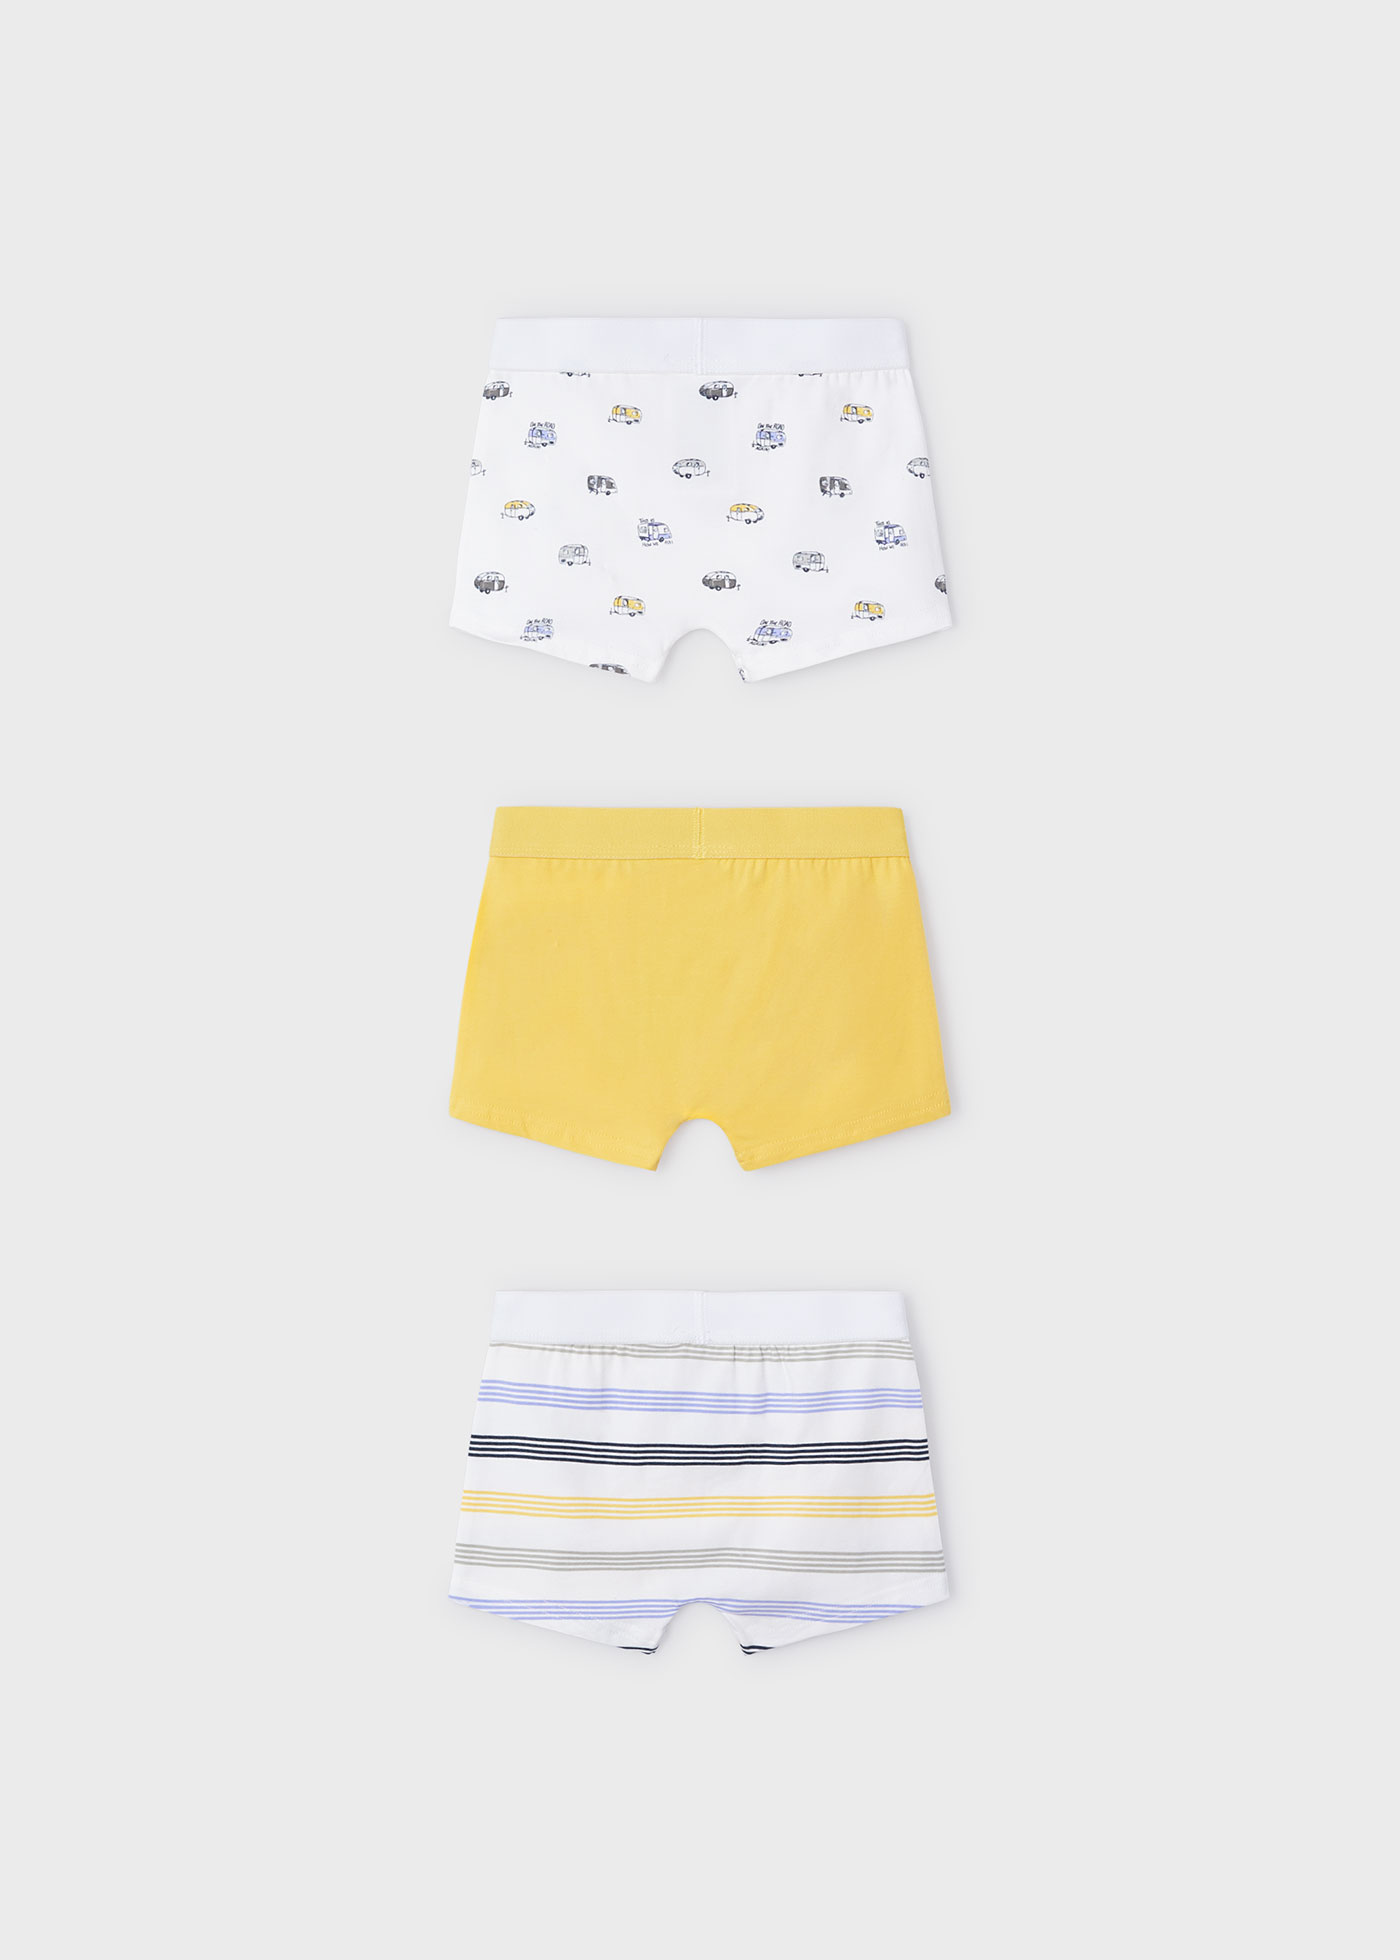 Boys 3-pack boxers